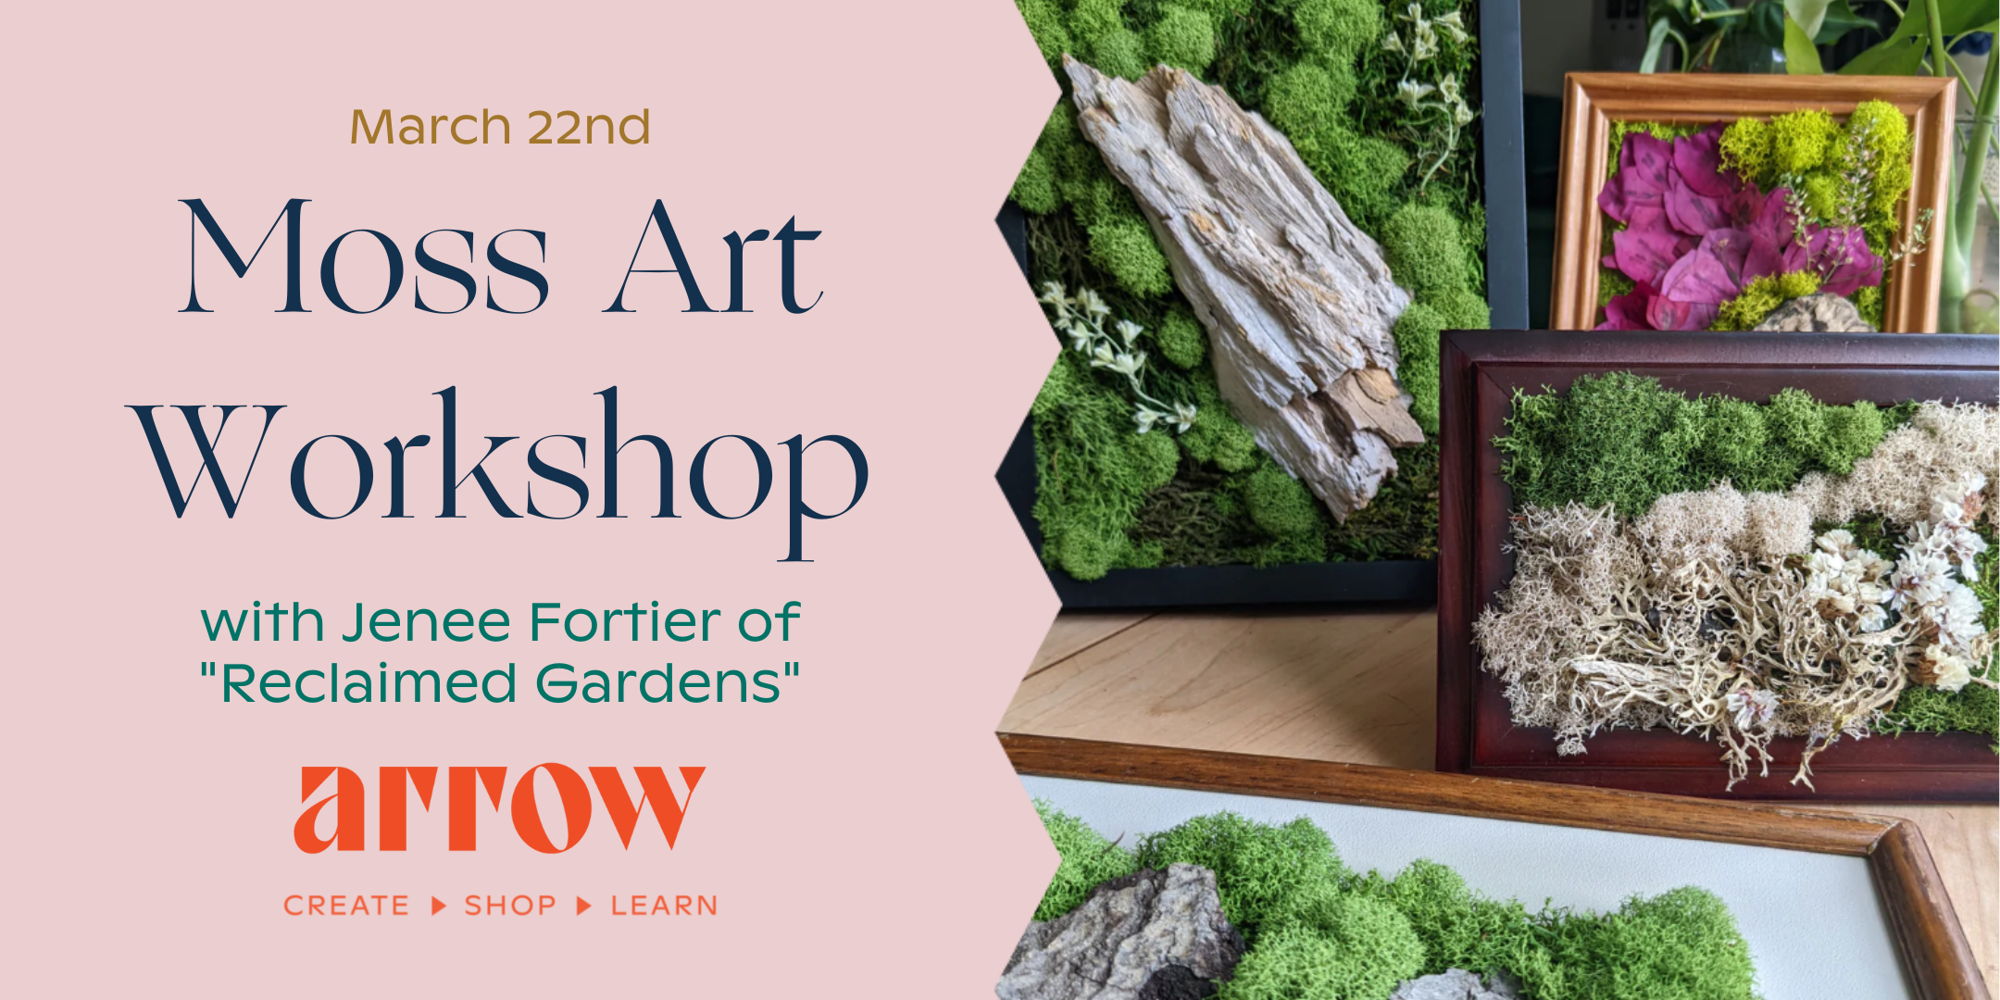 Moss Art Workshop with Jenee Fortier of Reclaimed Gardens promotional image